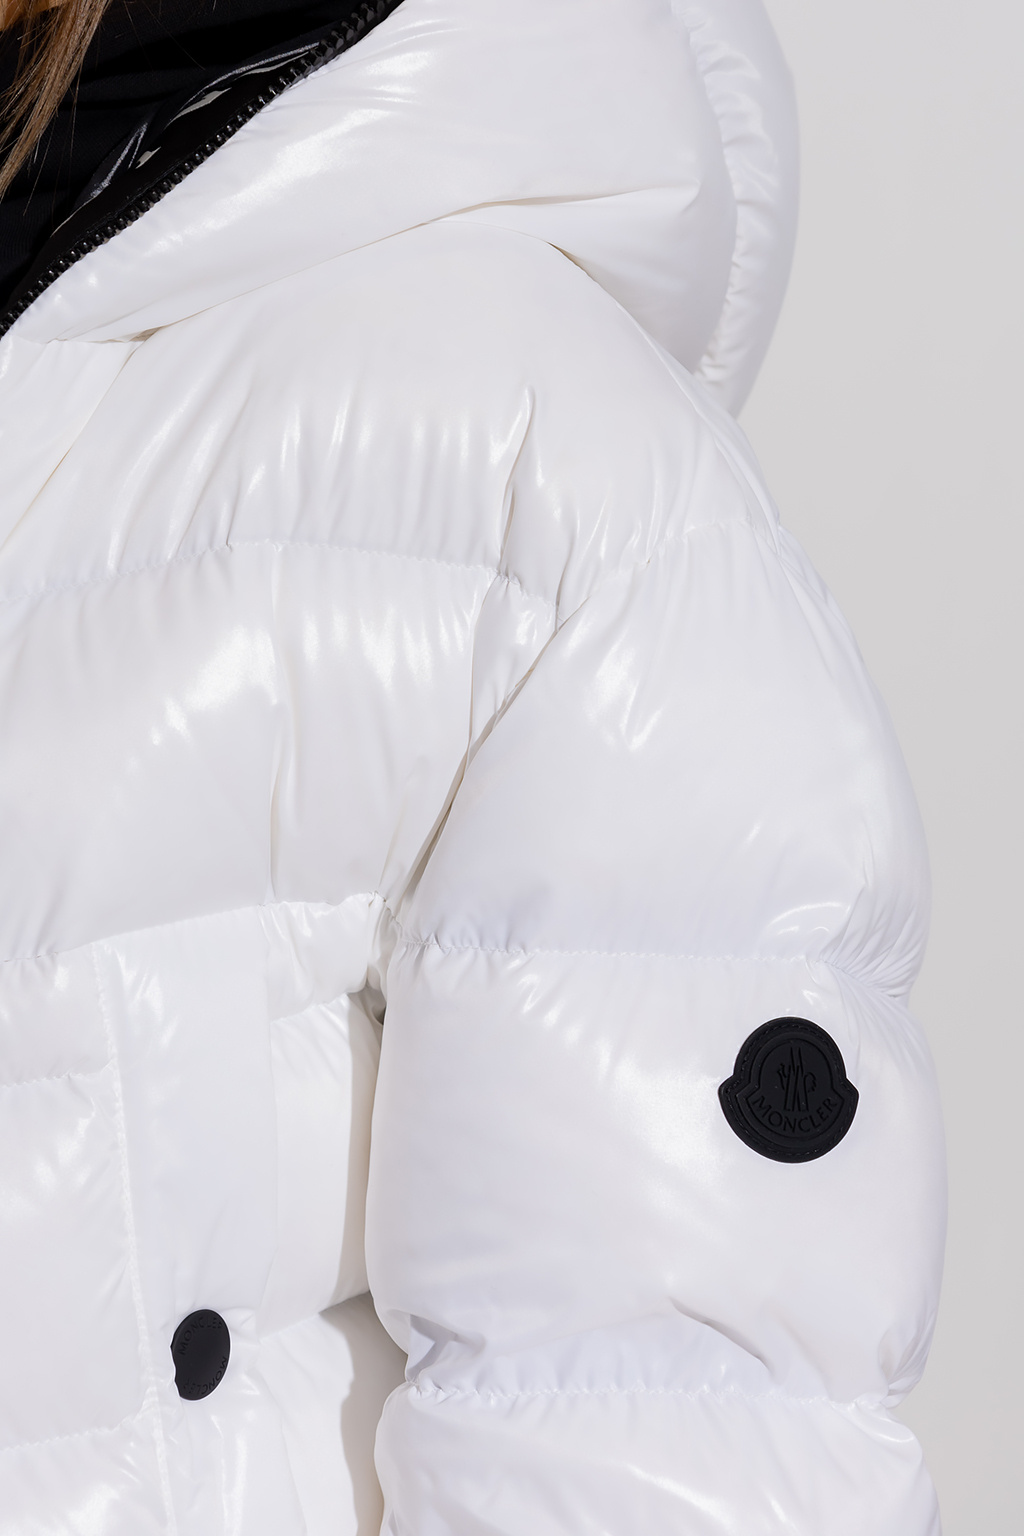 Fine Design High Quality Inflatable Clothes Inflatable Down Jackets For  Adults - Buy Inflatable Down Coat,Inflatable Down Wear,Inflatable Down  Jacket